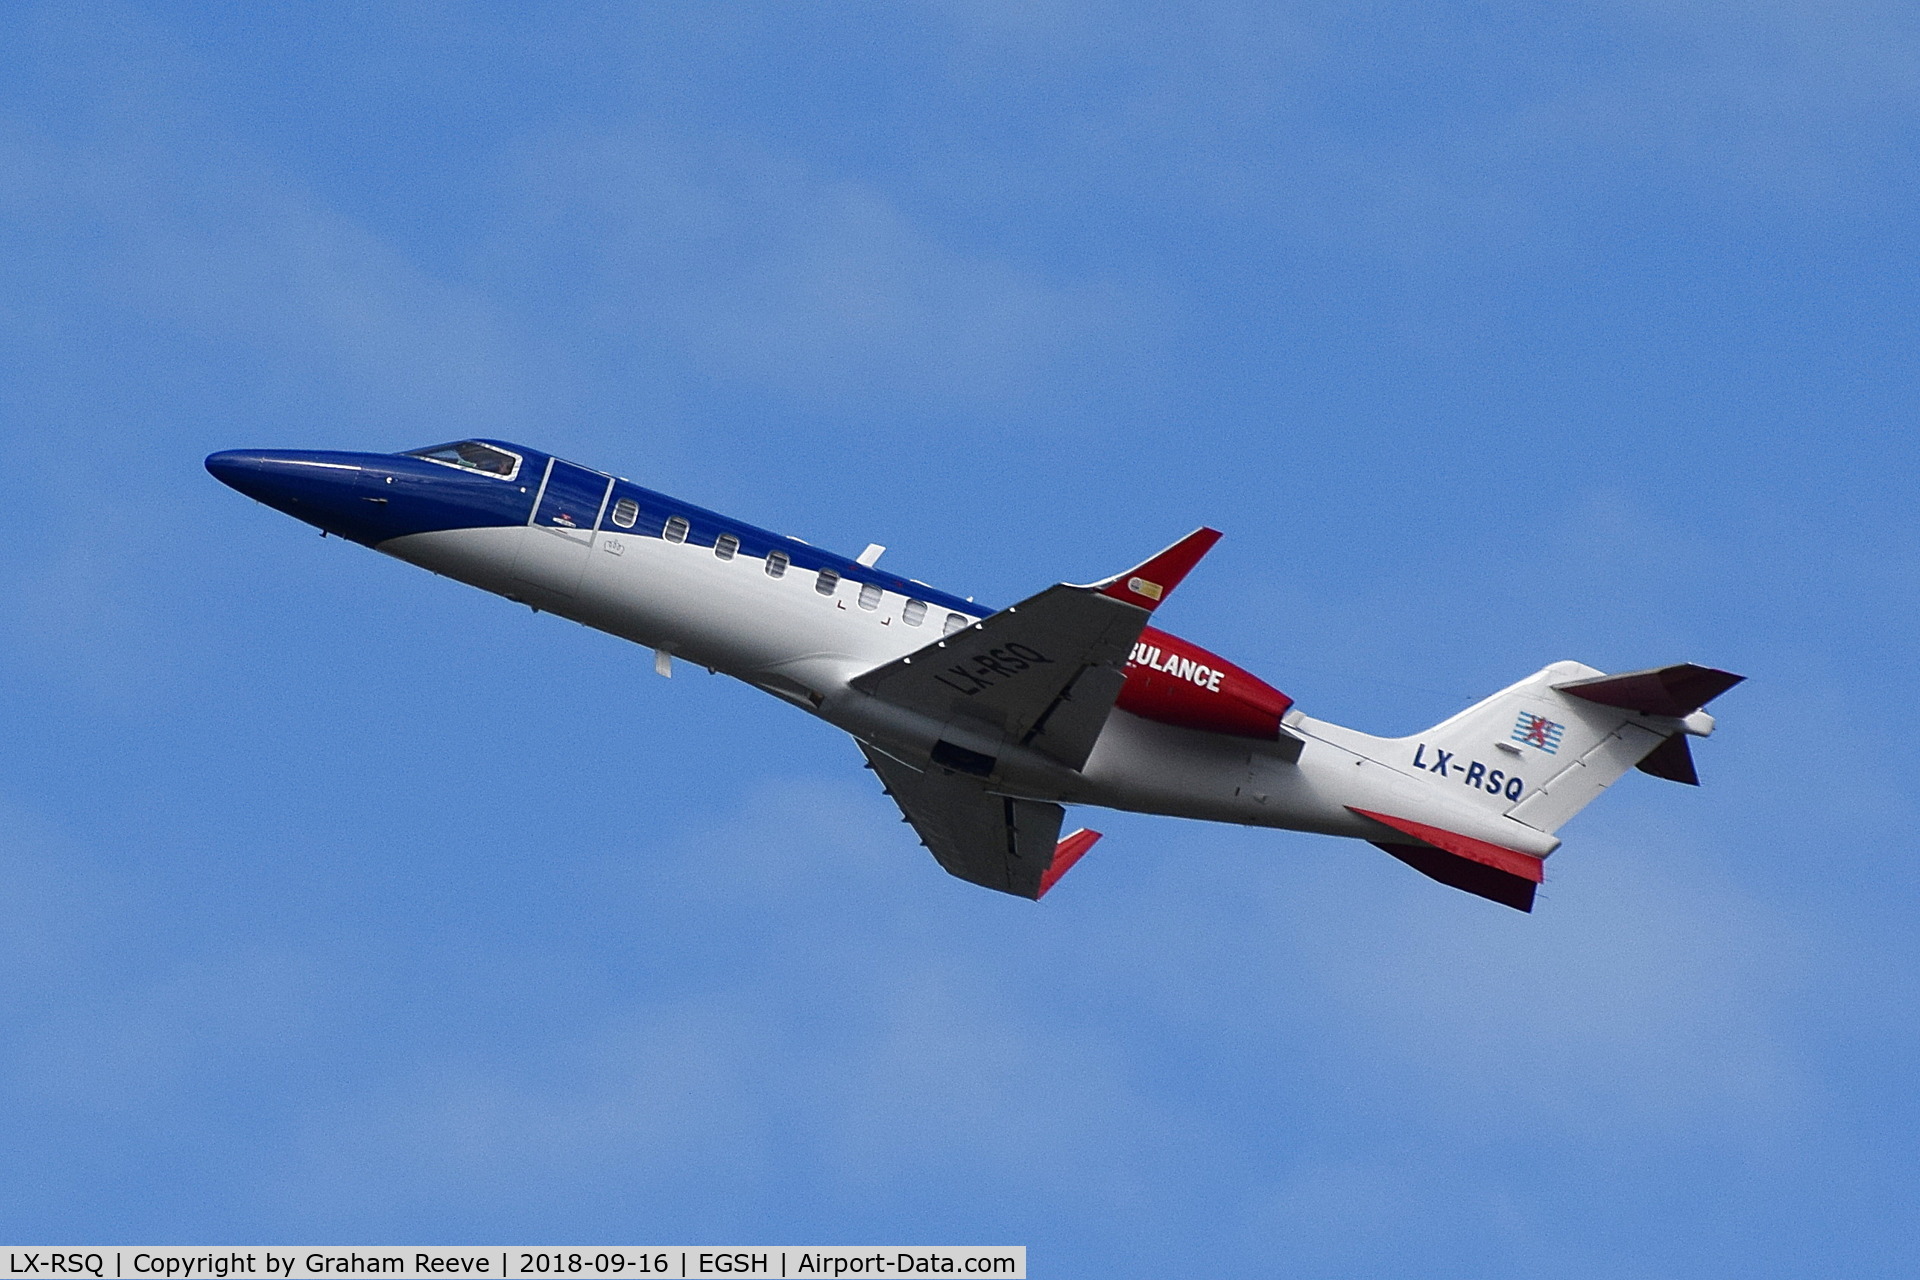 LX-RSQ, 2009 Learjet 45 C/N 398, Departing from Norwich.